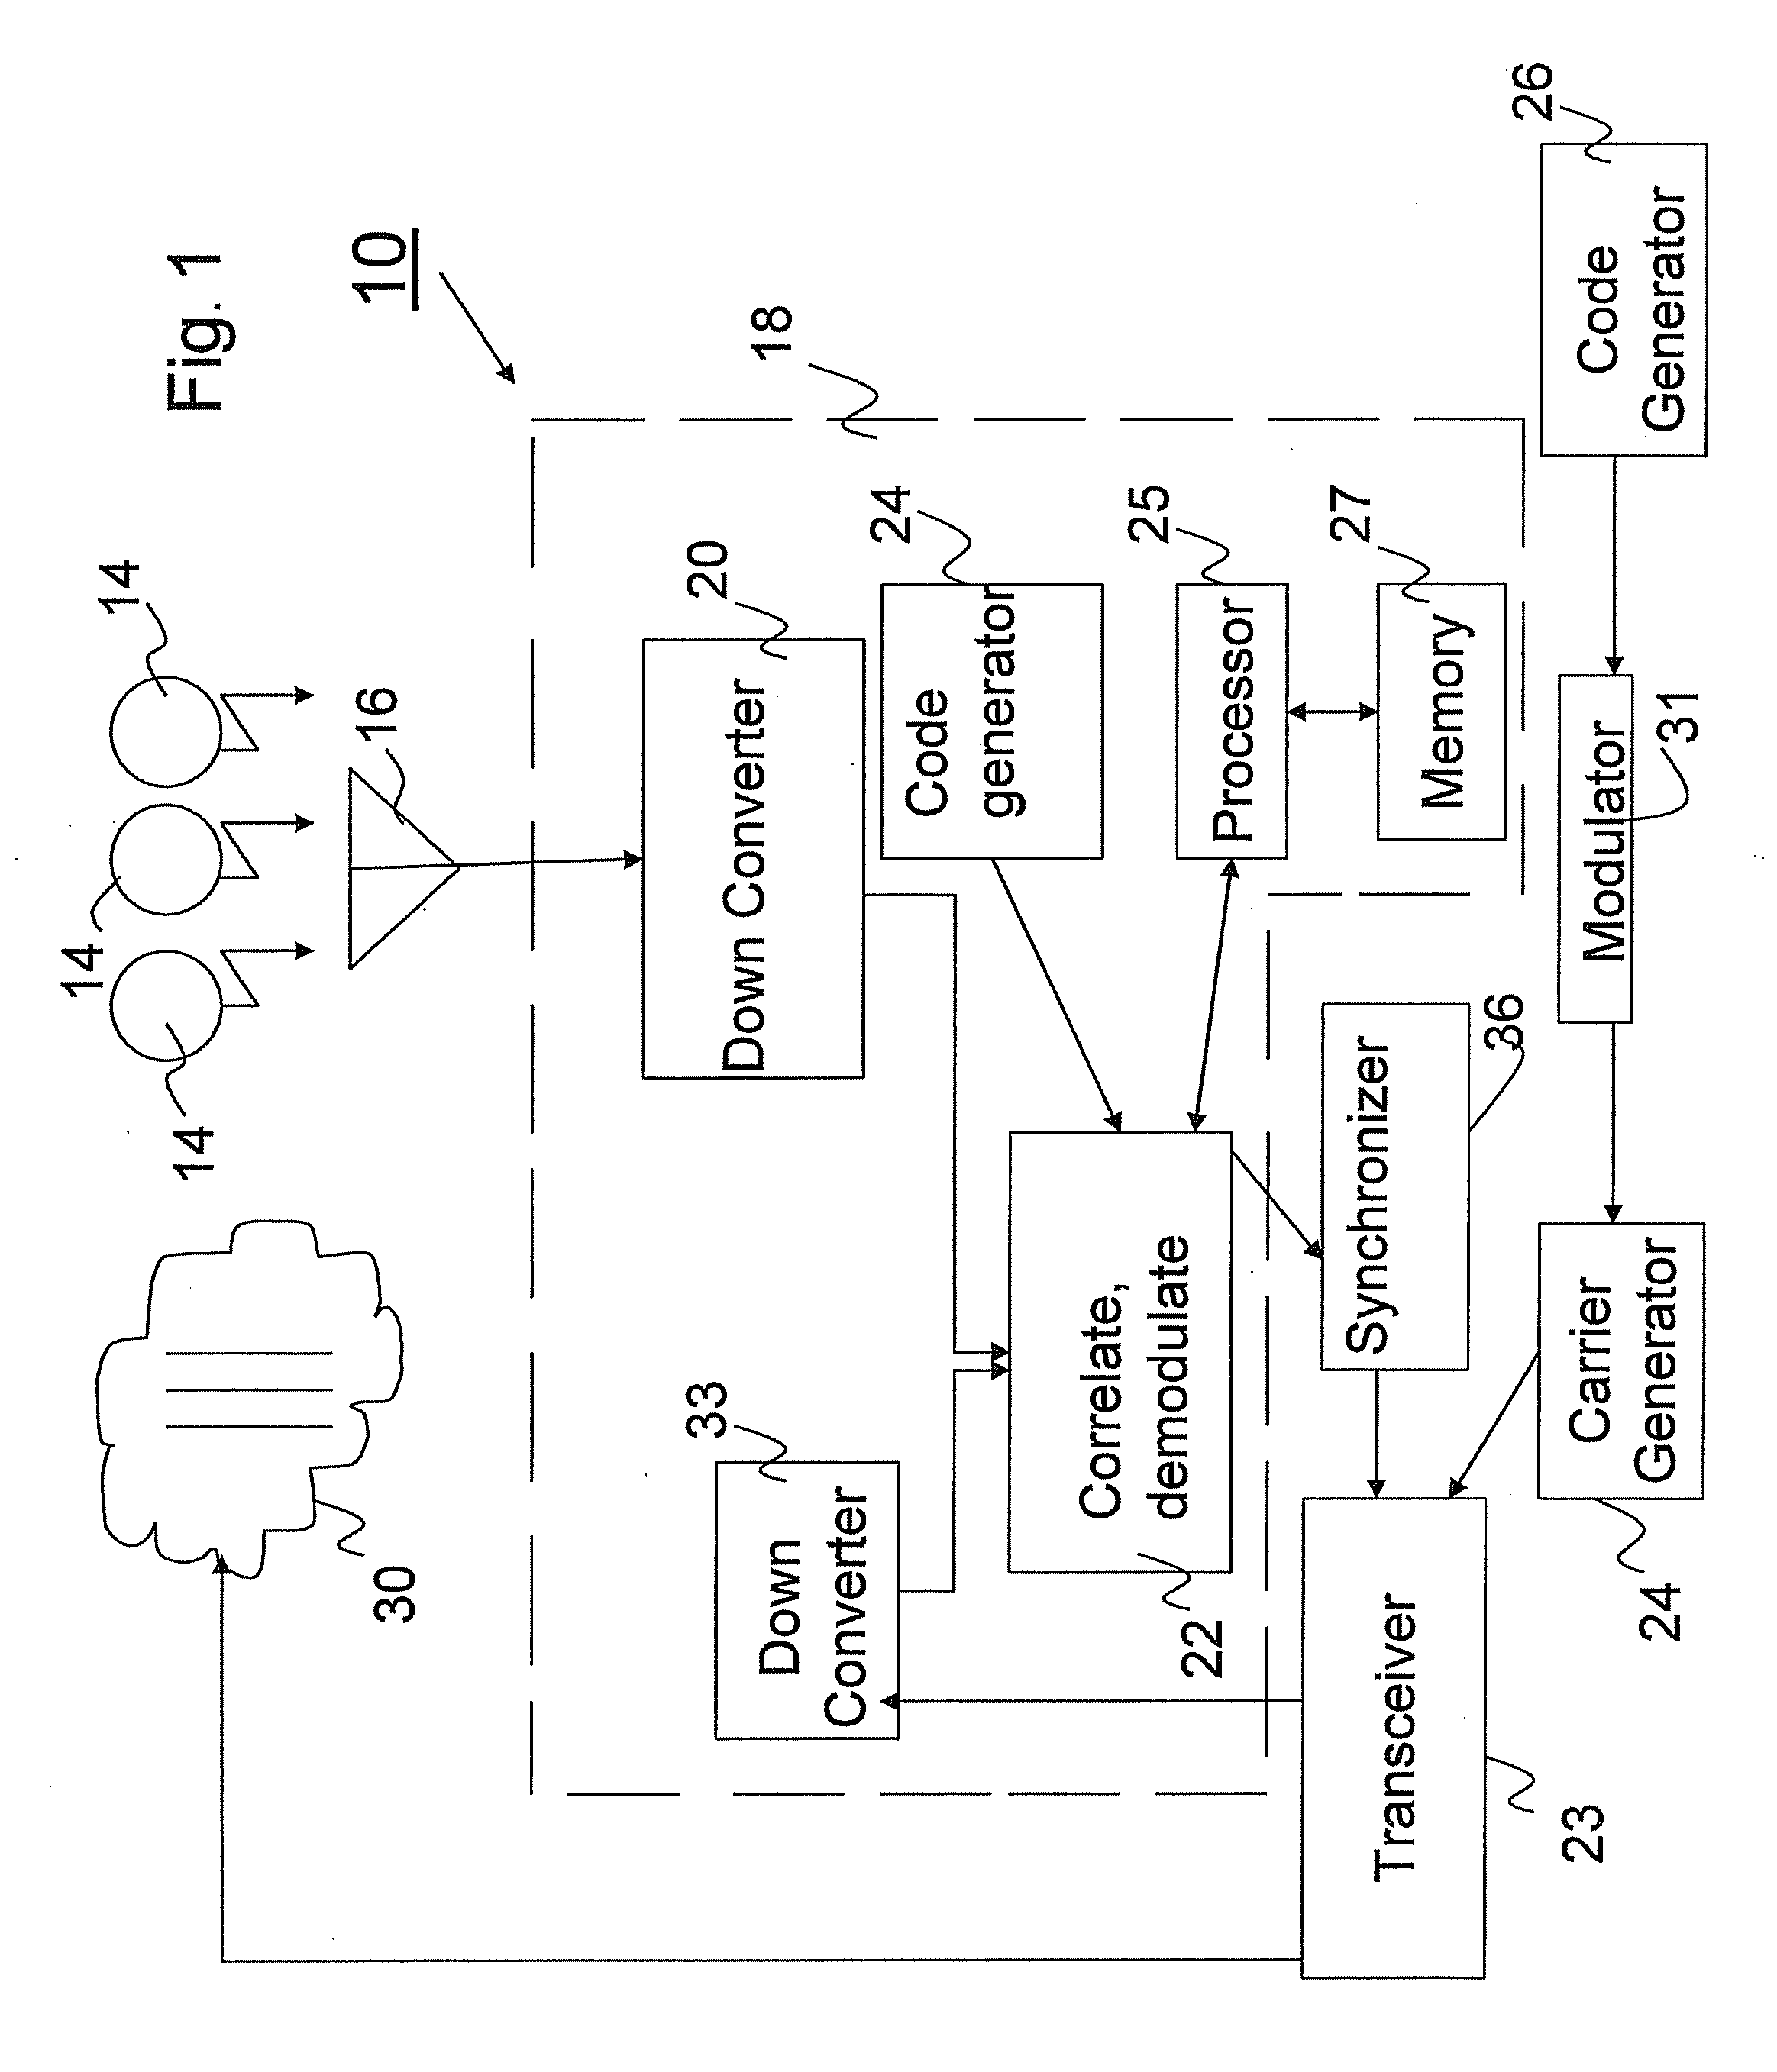 System for determining position using two way time transfer signals